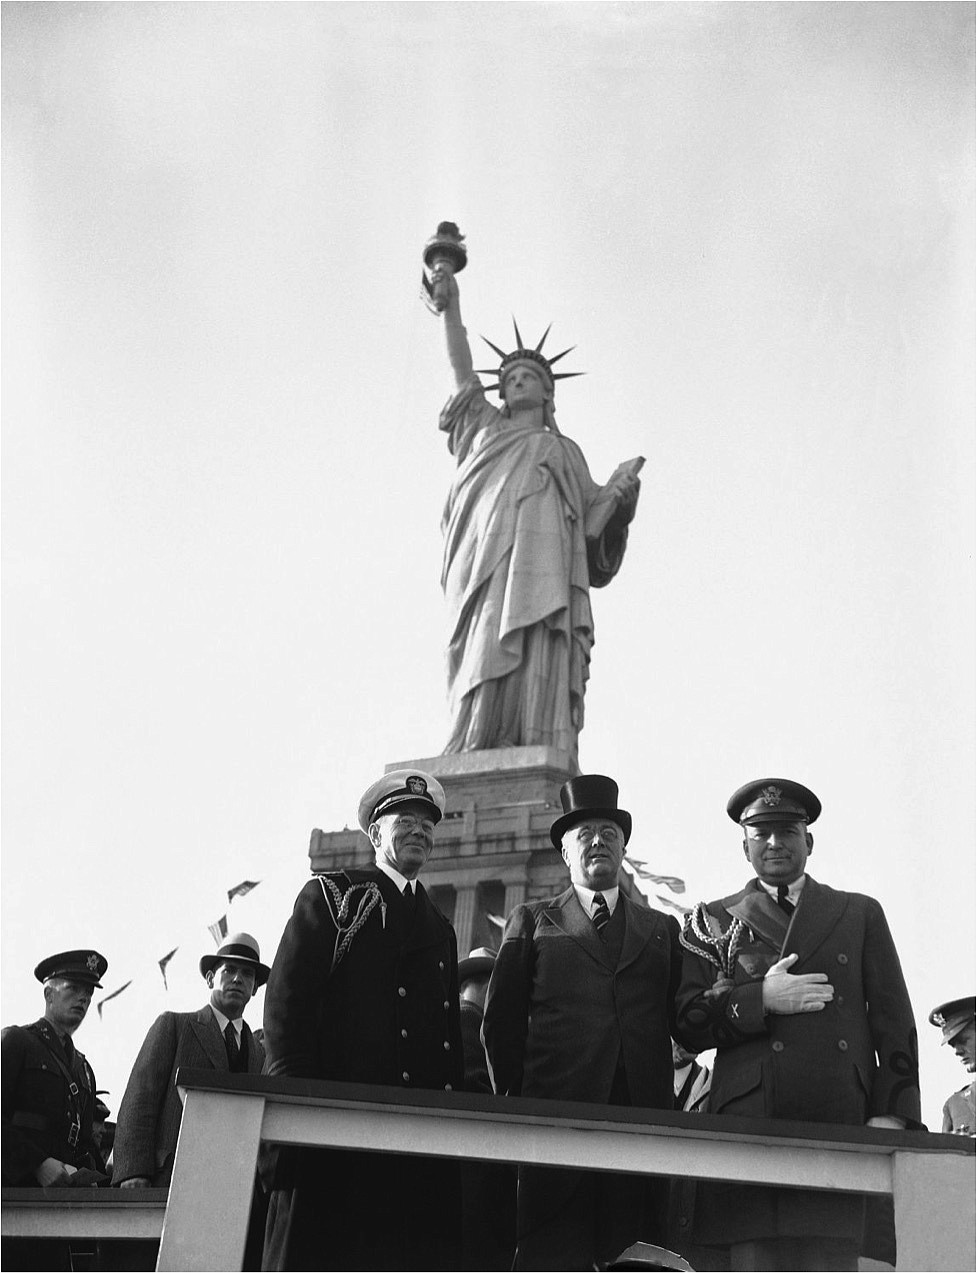 PUBLIC DOMAIN
President Grover Cleveland at the dedication of the Statue of Liberty on Oct. 28, 1886.